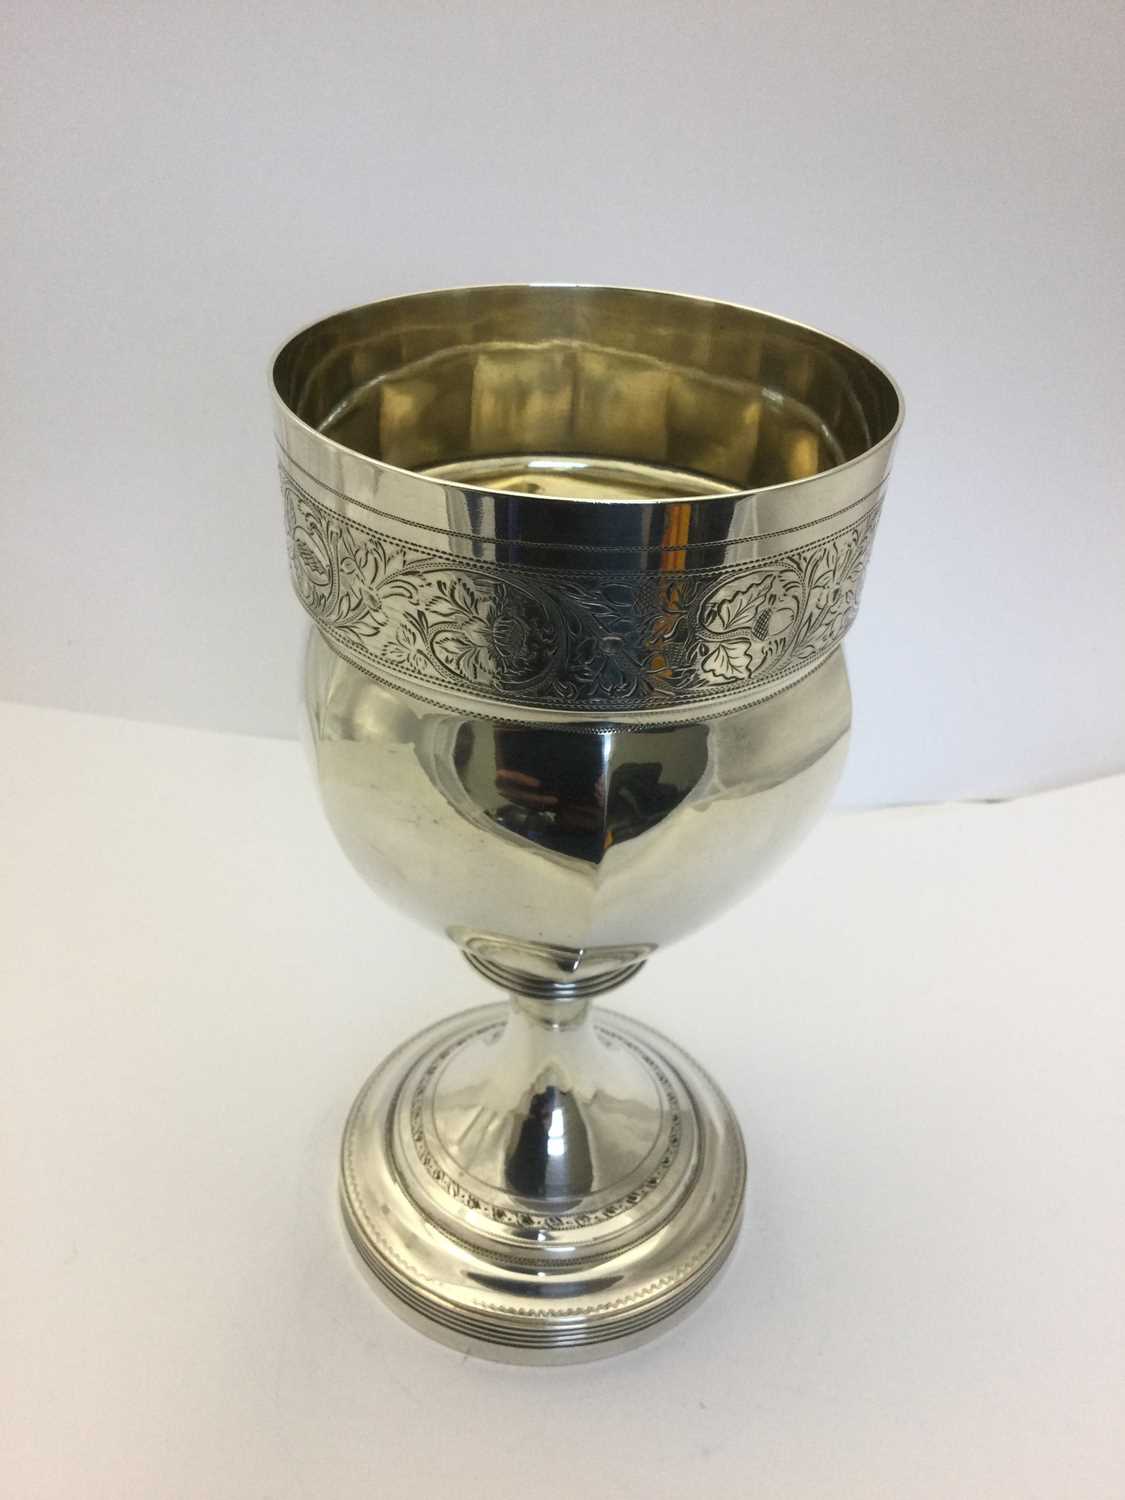 A George III Silver Goblet, by Robert Hennell and Samuel Hennell, London, 1809 - Image 2 of 7